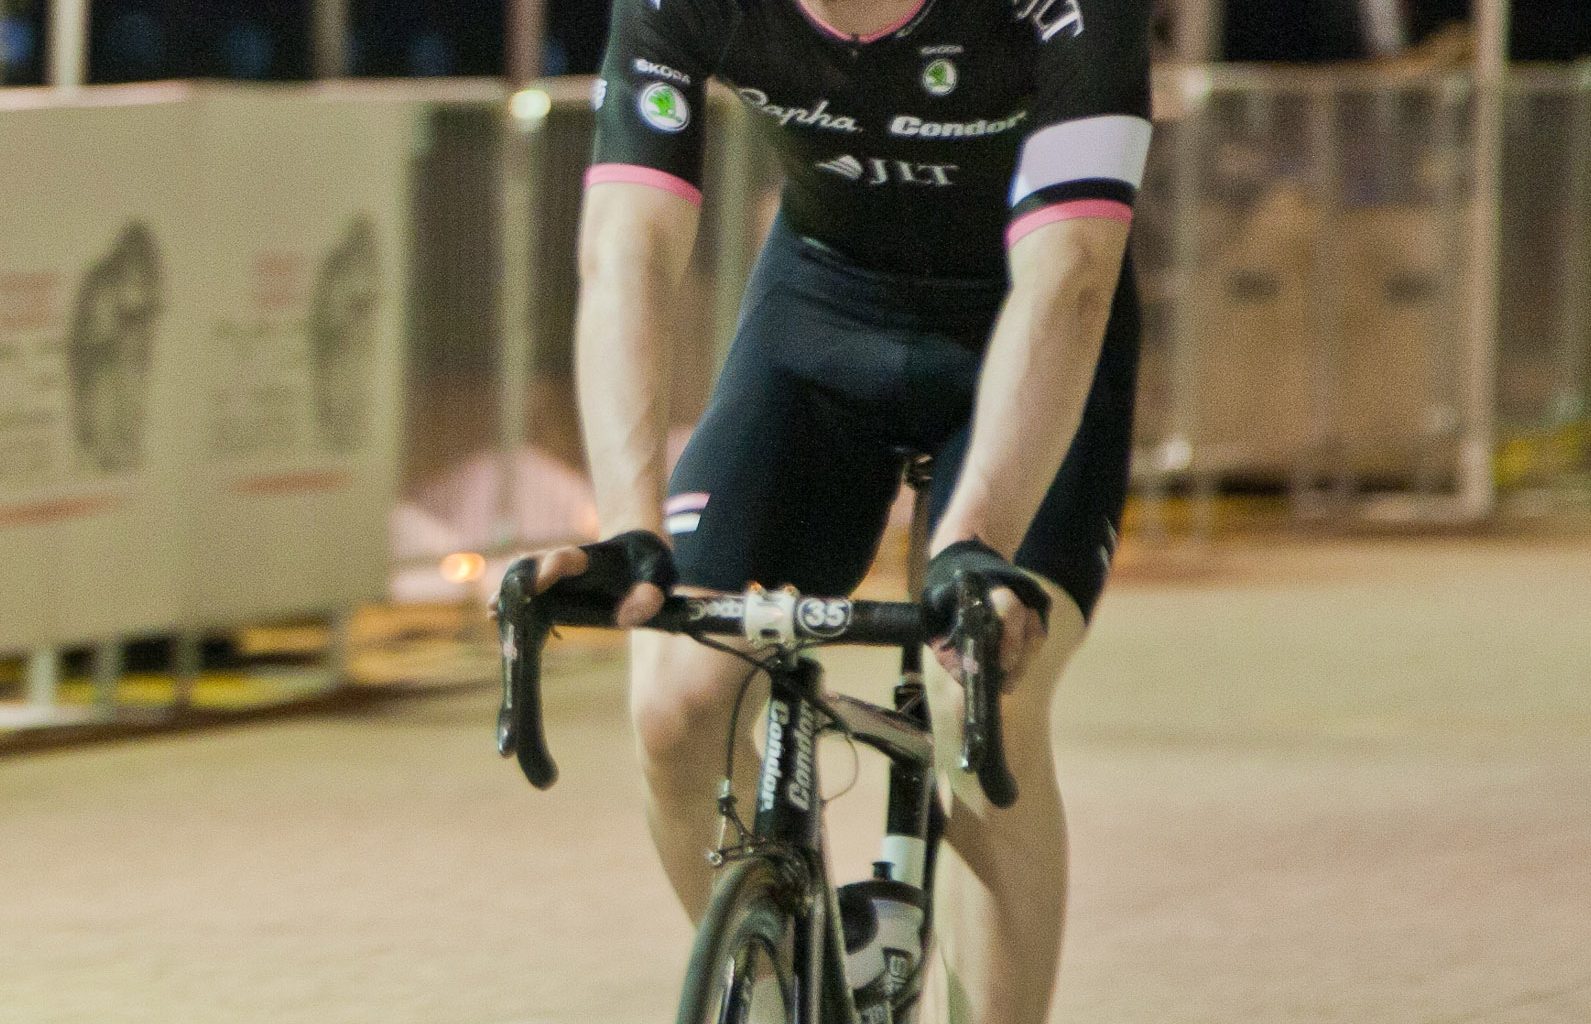 UPDATE: Ed Clancy on OCBC Cycle Singapore Professional ...